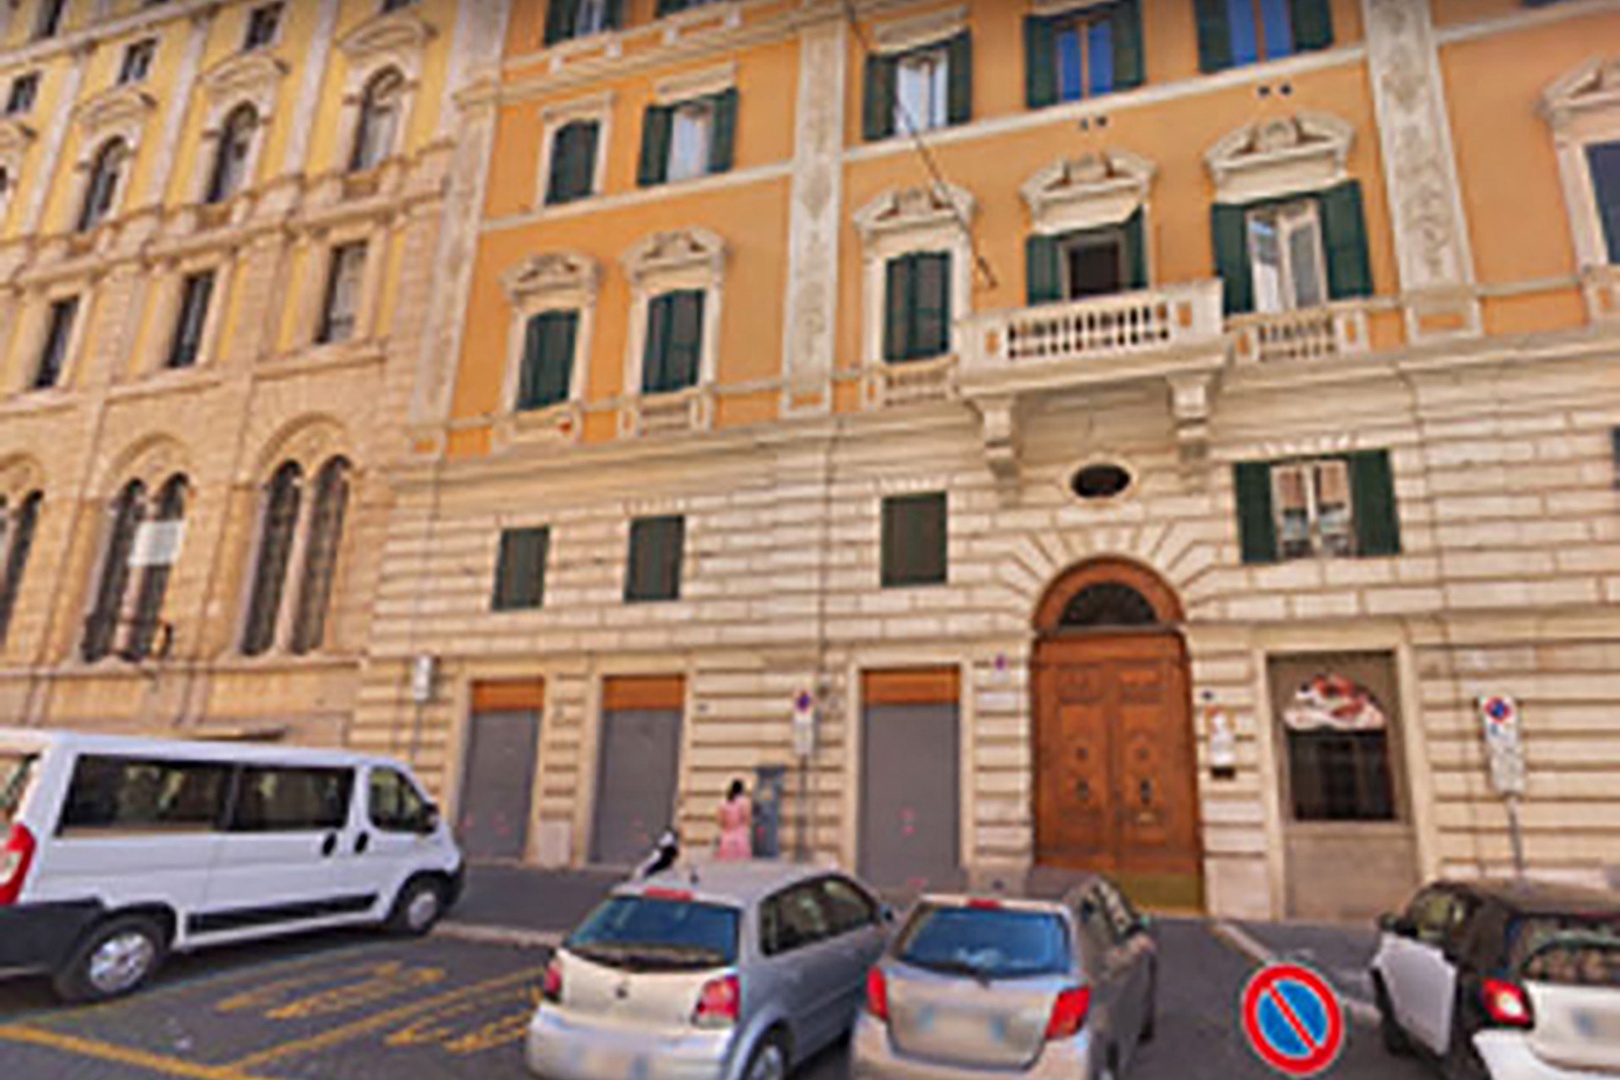 The fine palazzo where the Verdi apartment is situated.